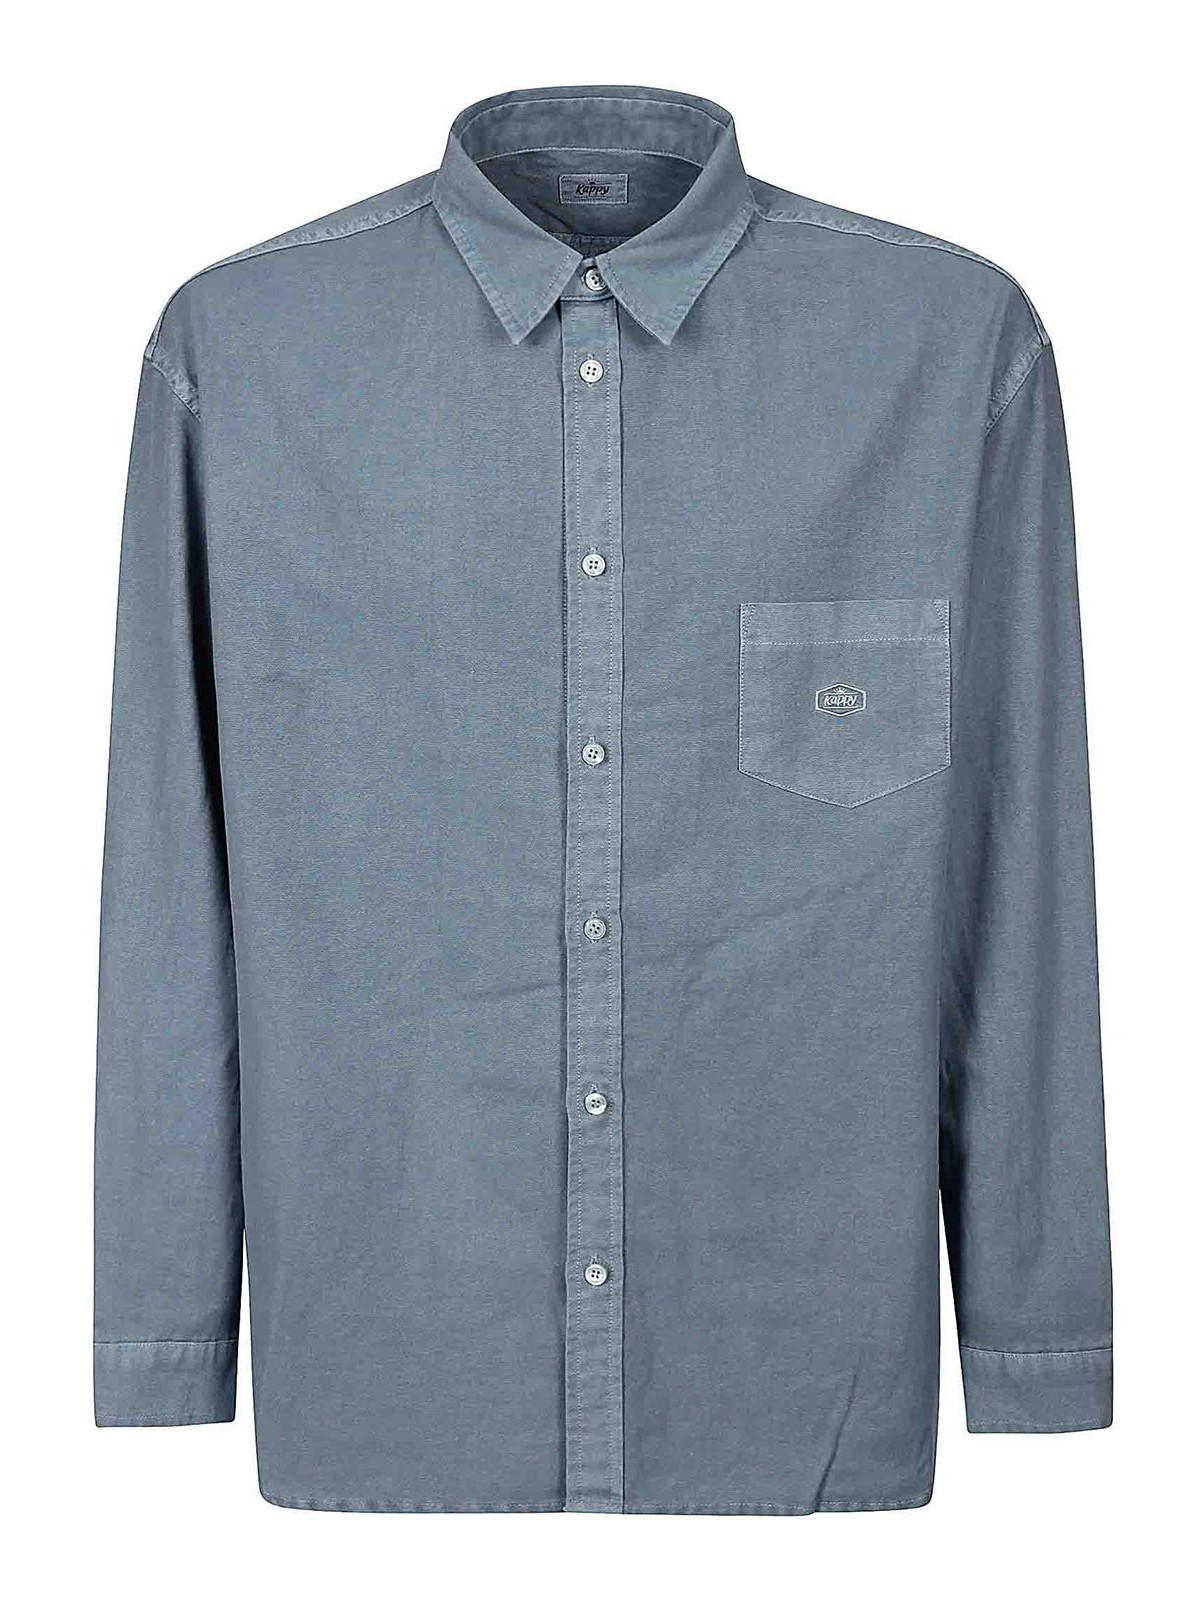 Kappy Pigment Oxford Shirts In Blue